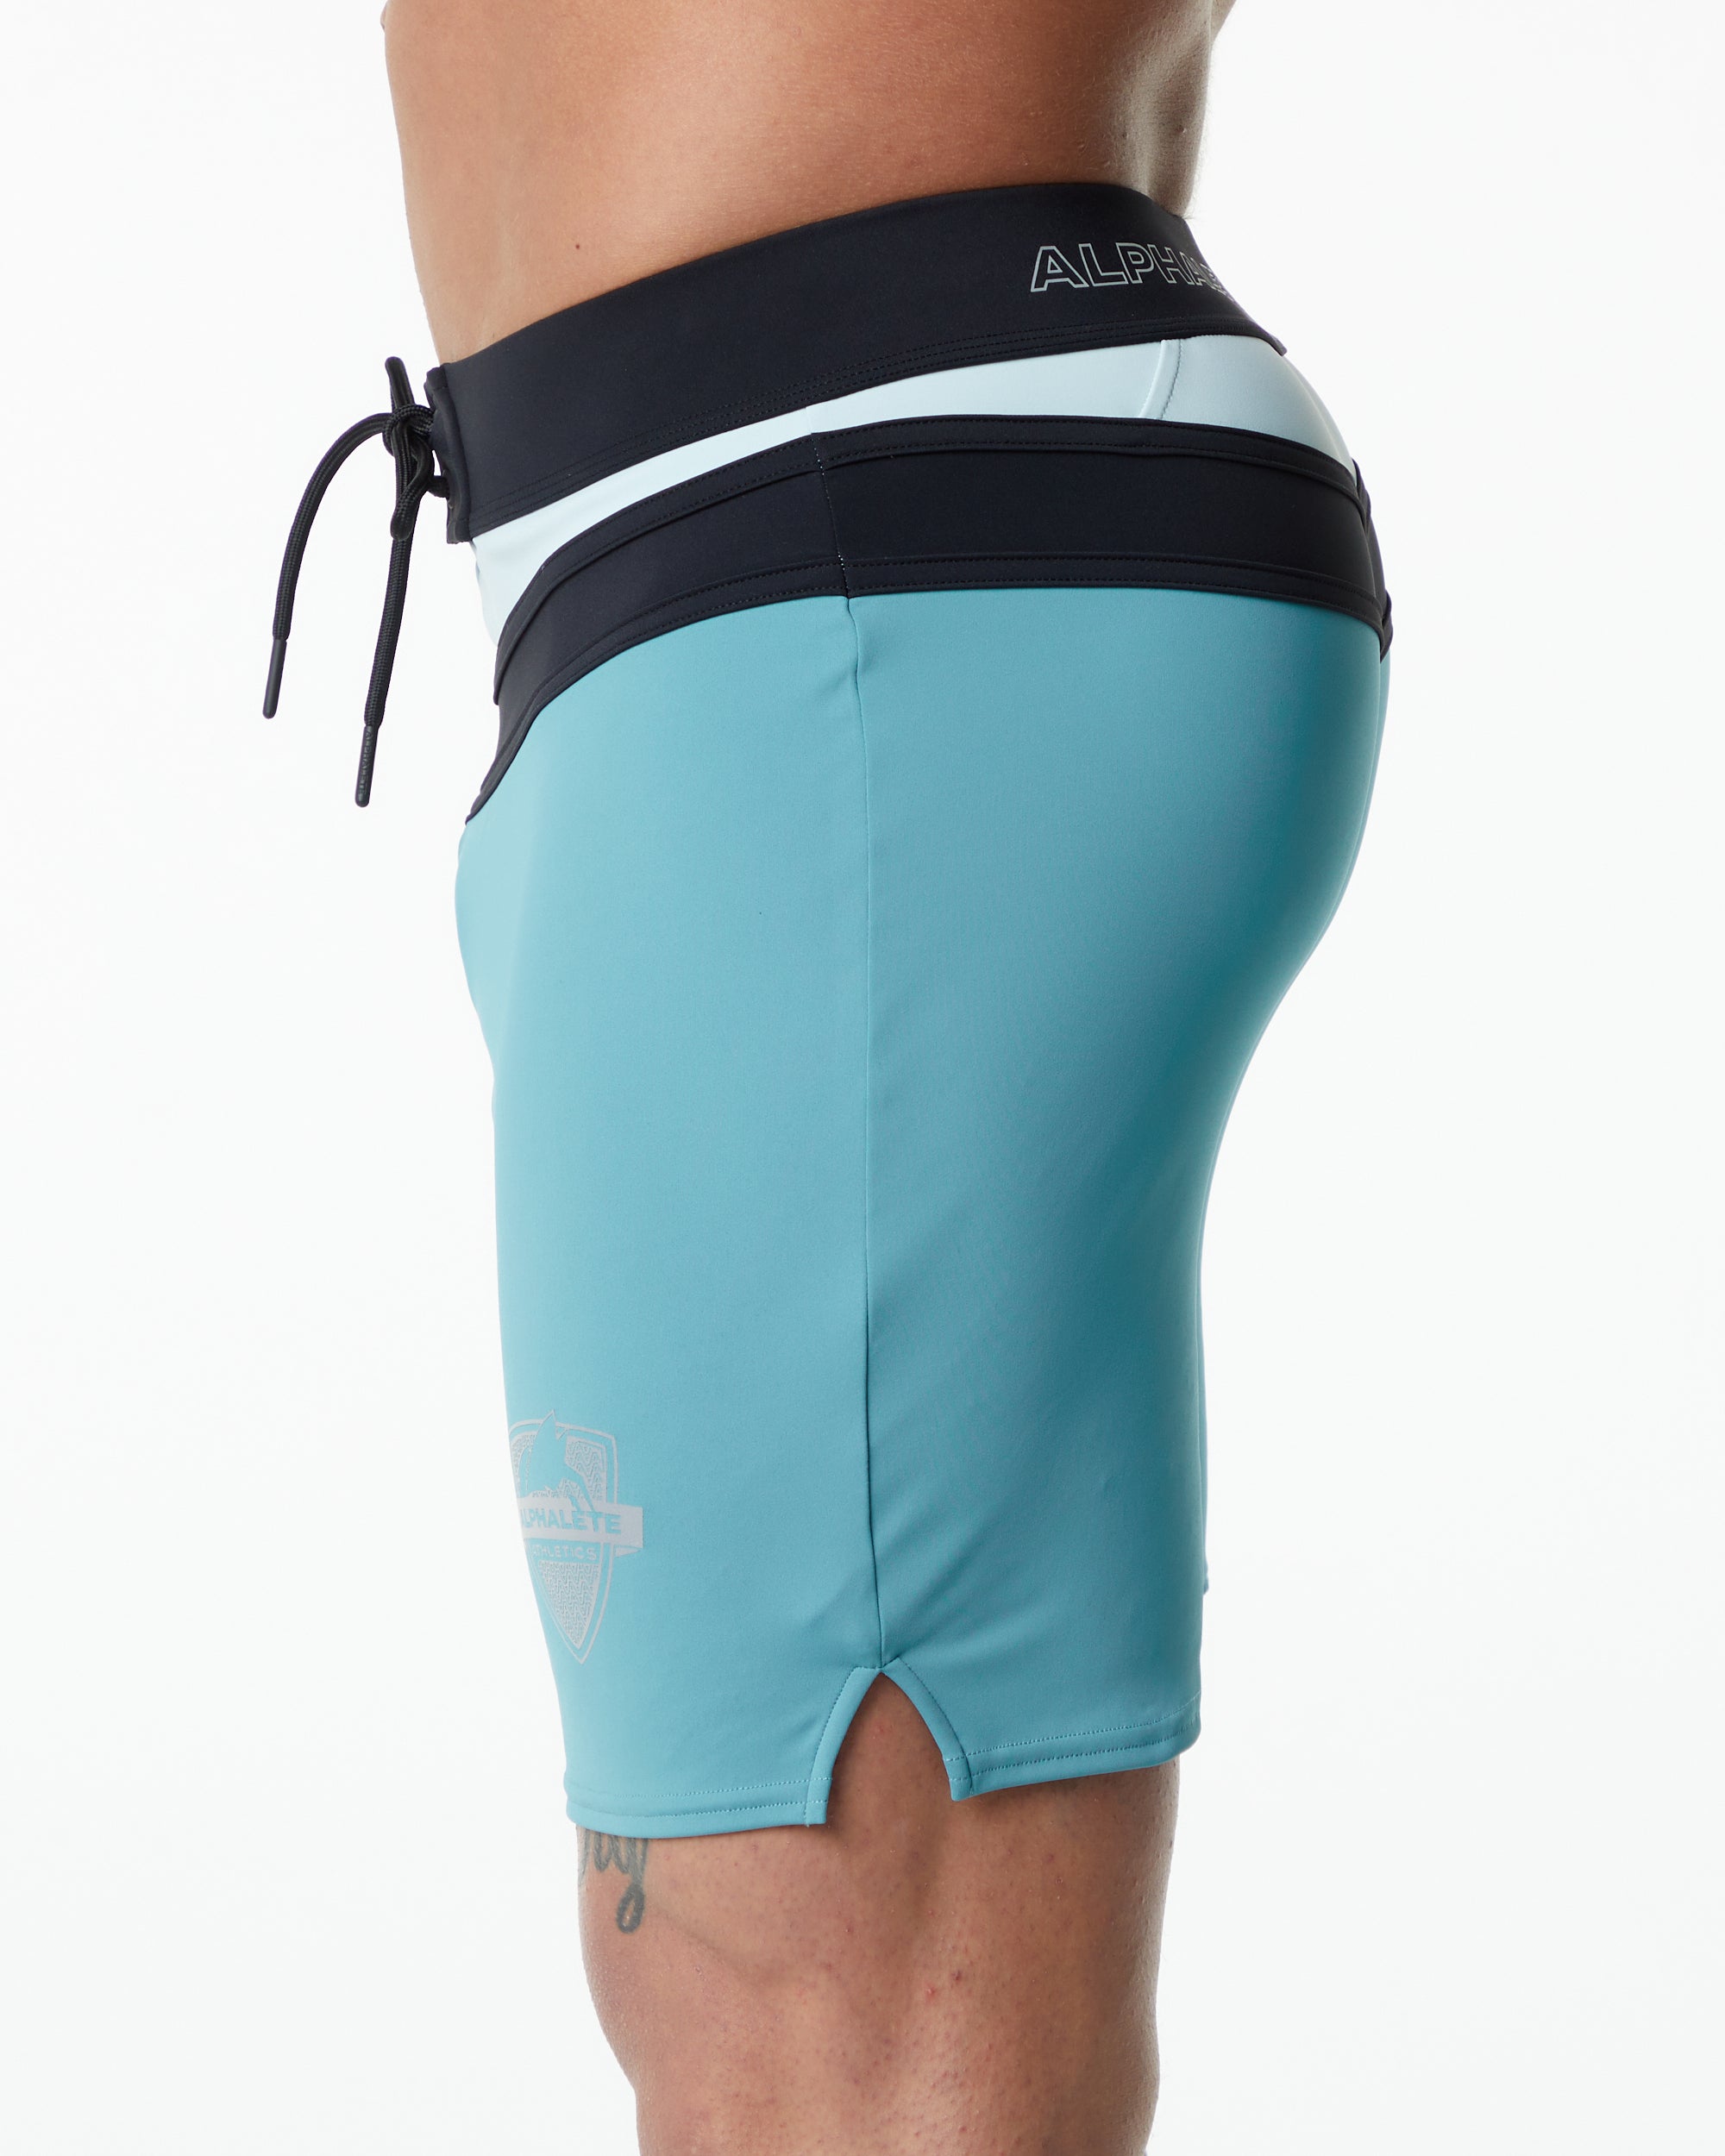 Trident Competition Short - Teal